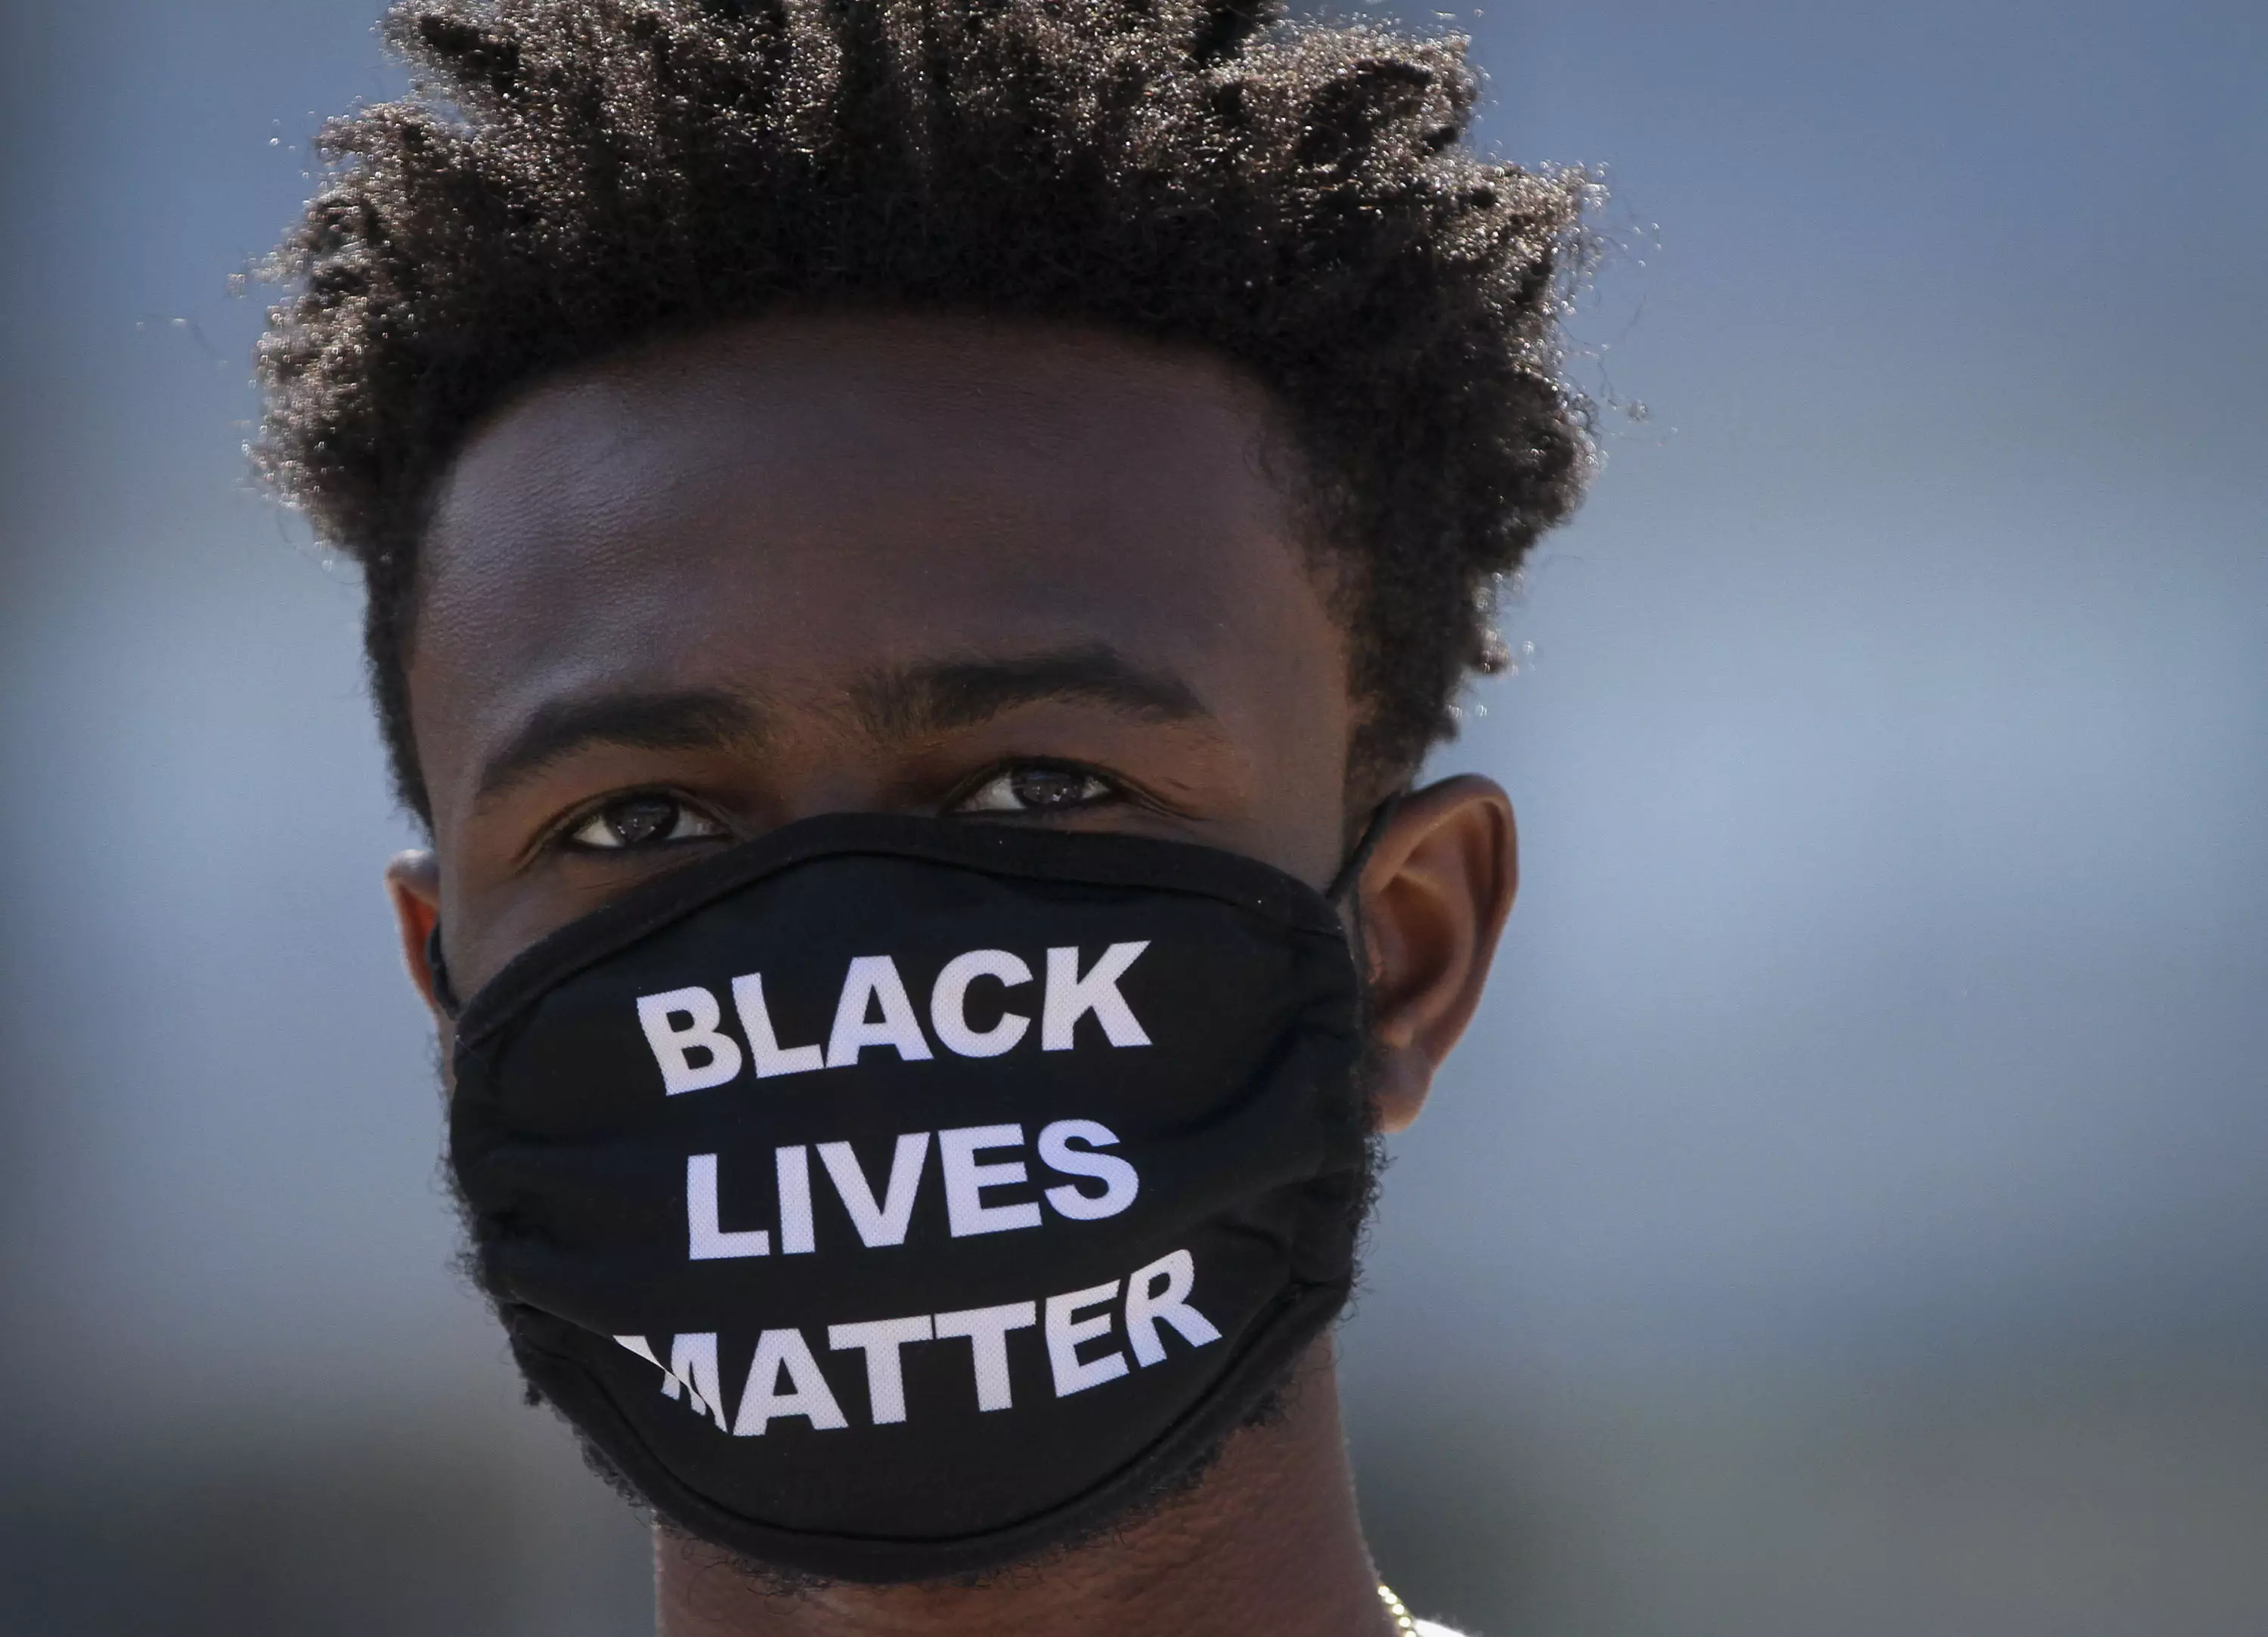 The Black Lives Matter movement has been nominated for the 2021 Nobel Peace Prize.